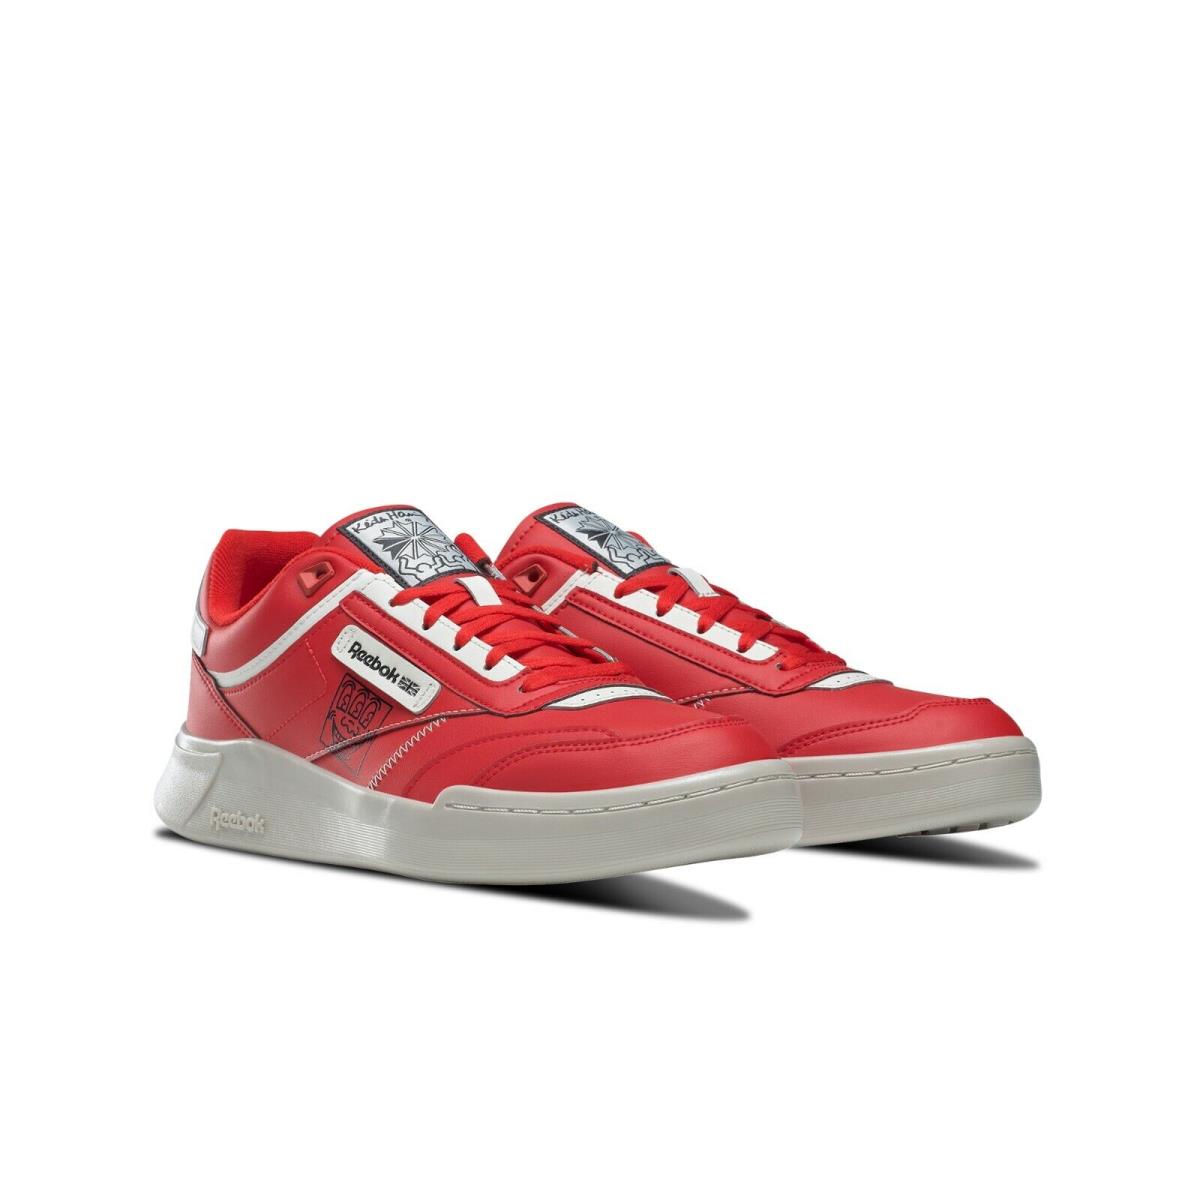 Reebok shoes Keith Haring - Red 0